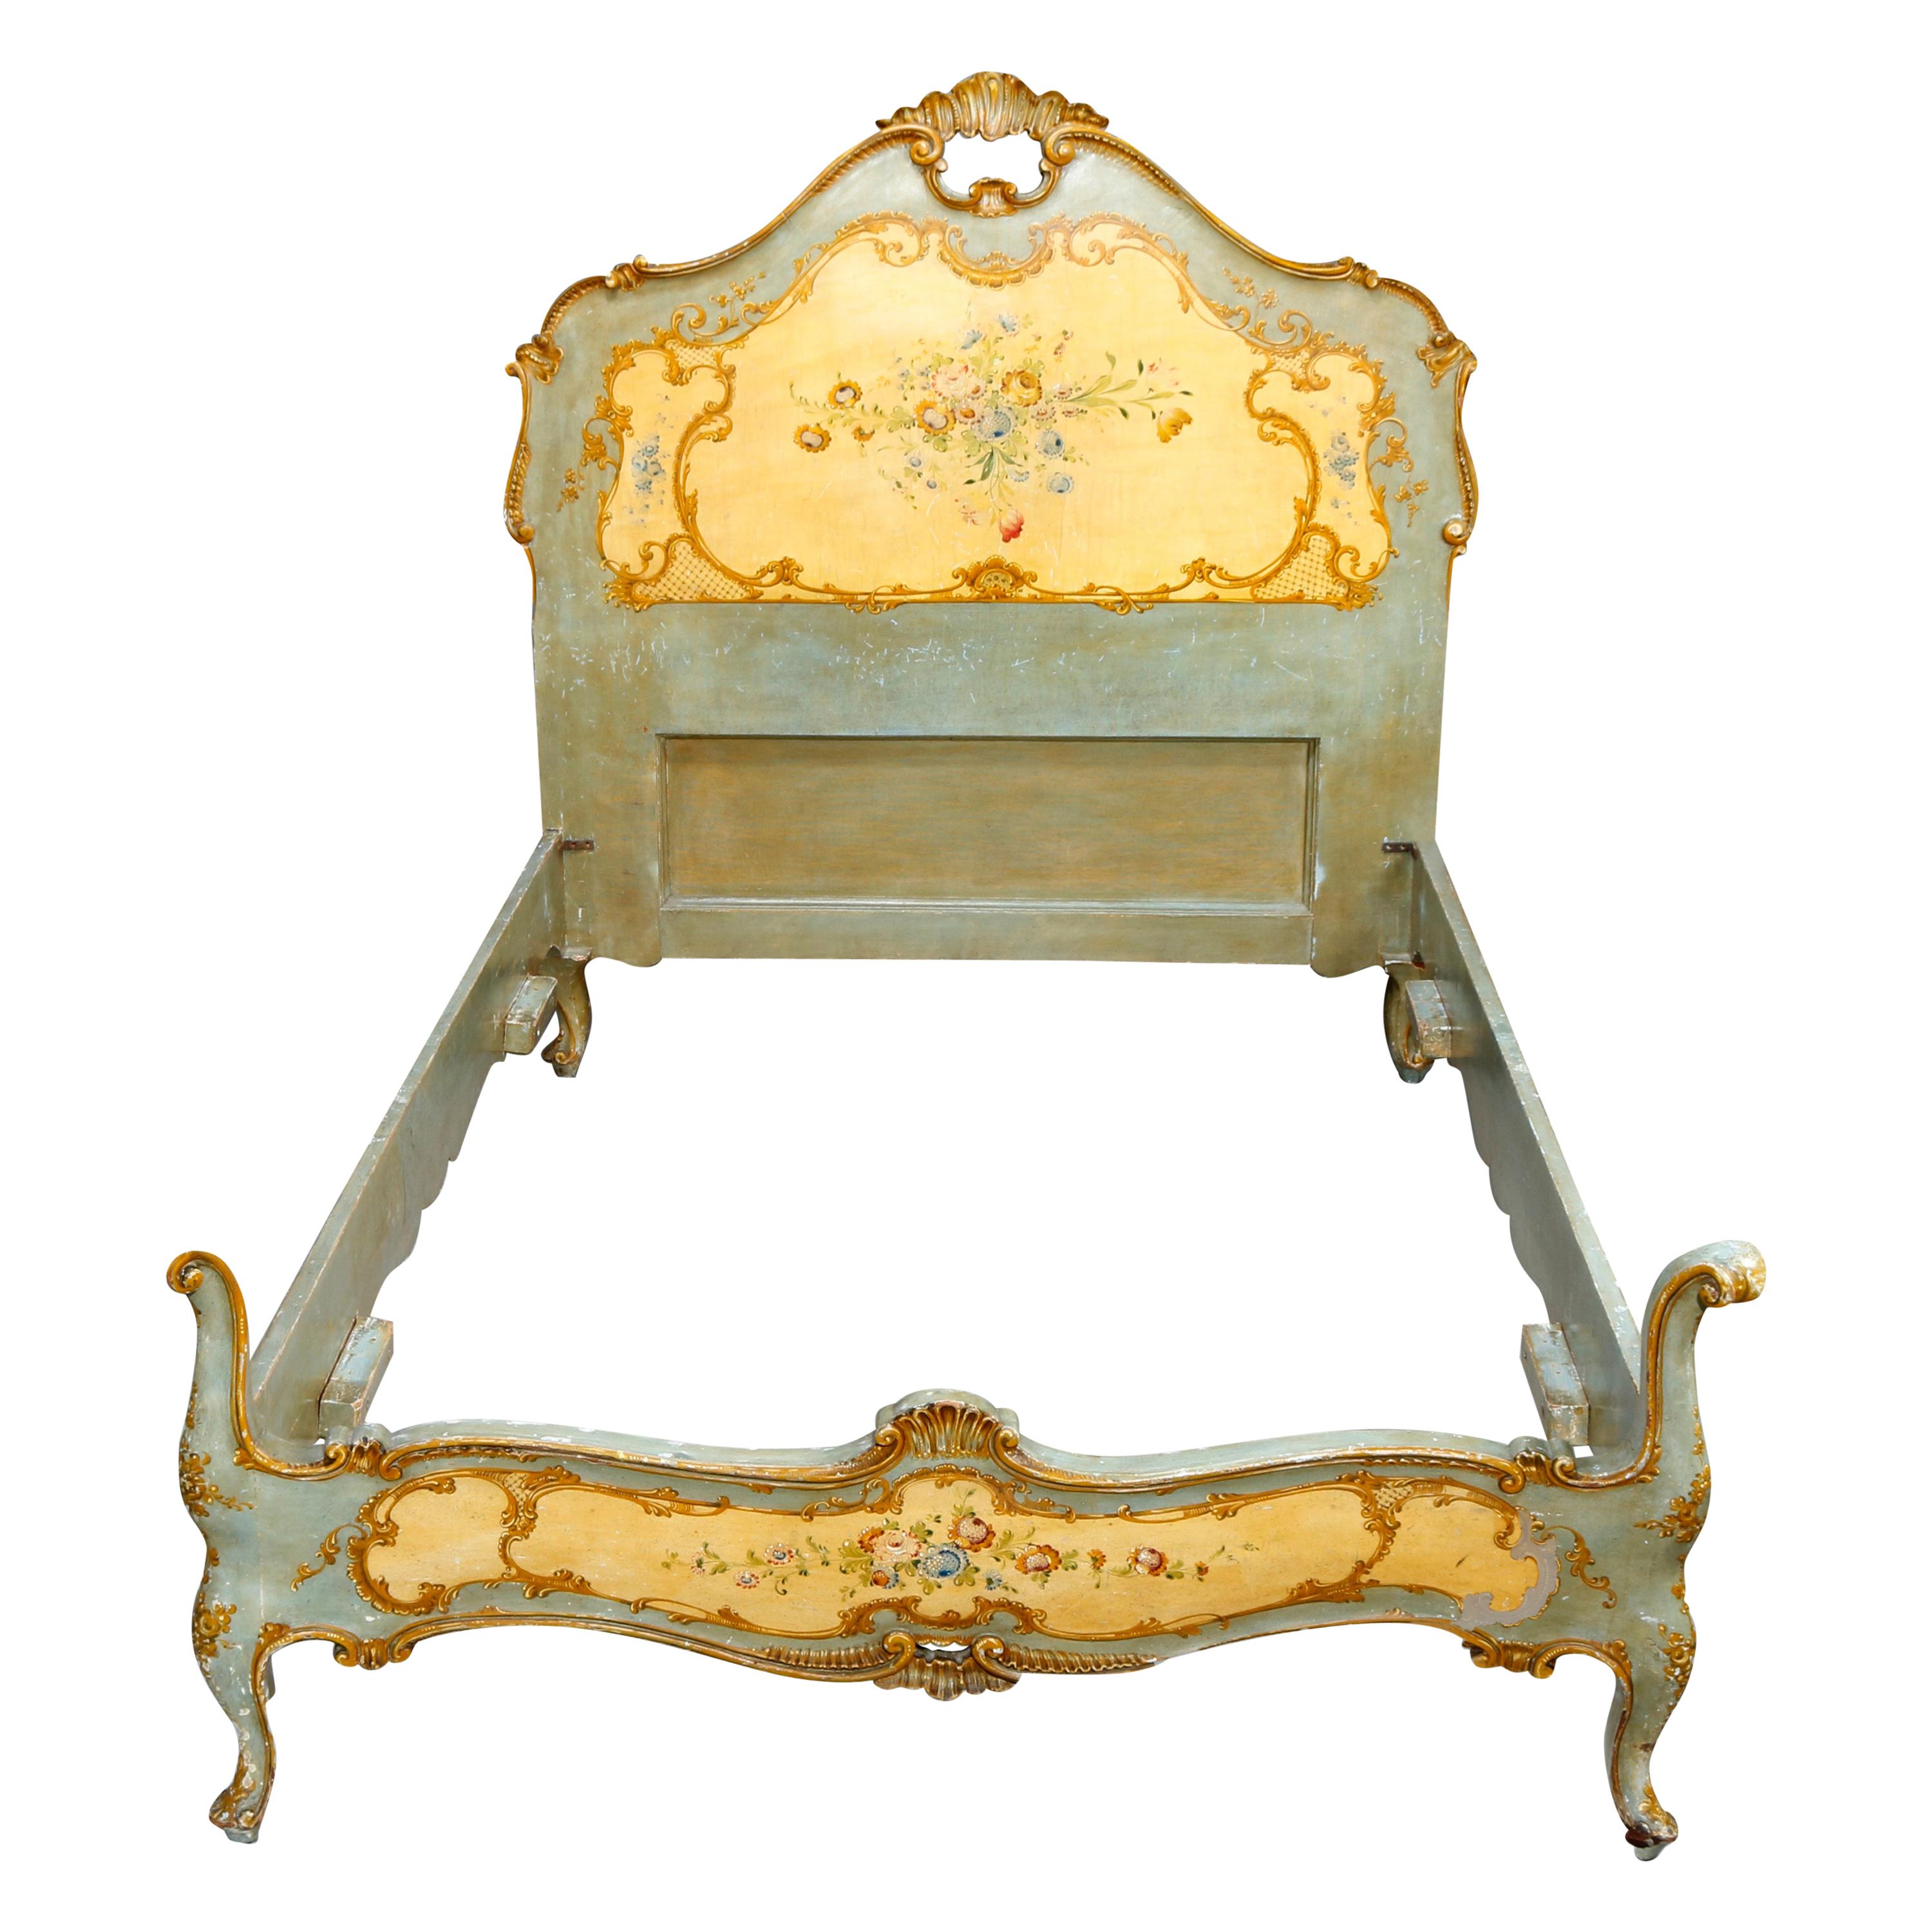 Antique French Floral Paint & Gilt Decorated Bed, Circa 1890